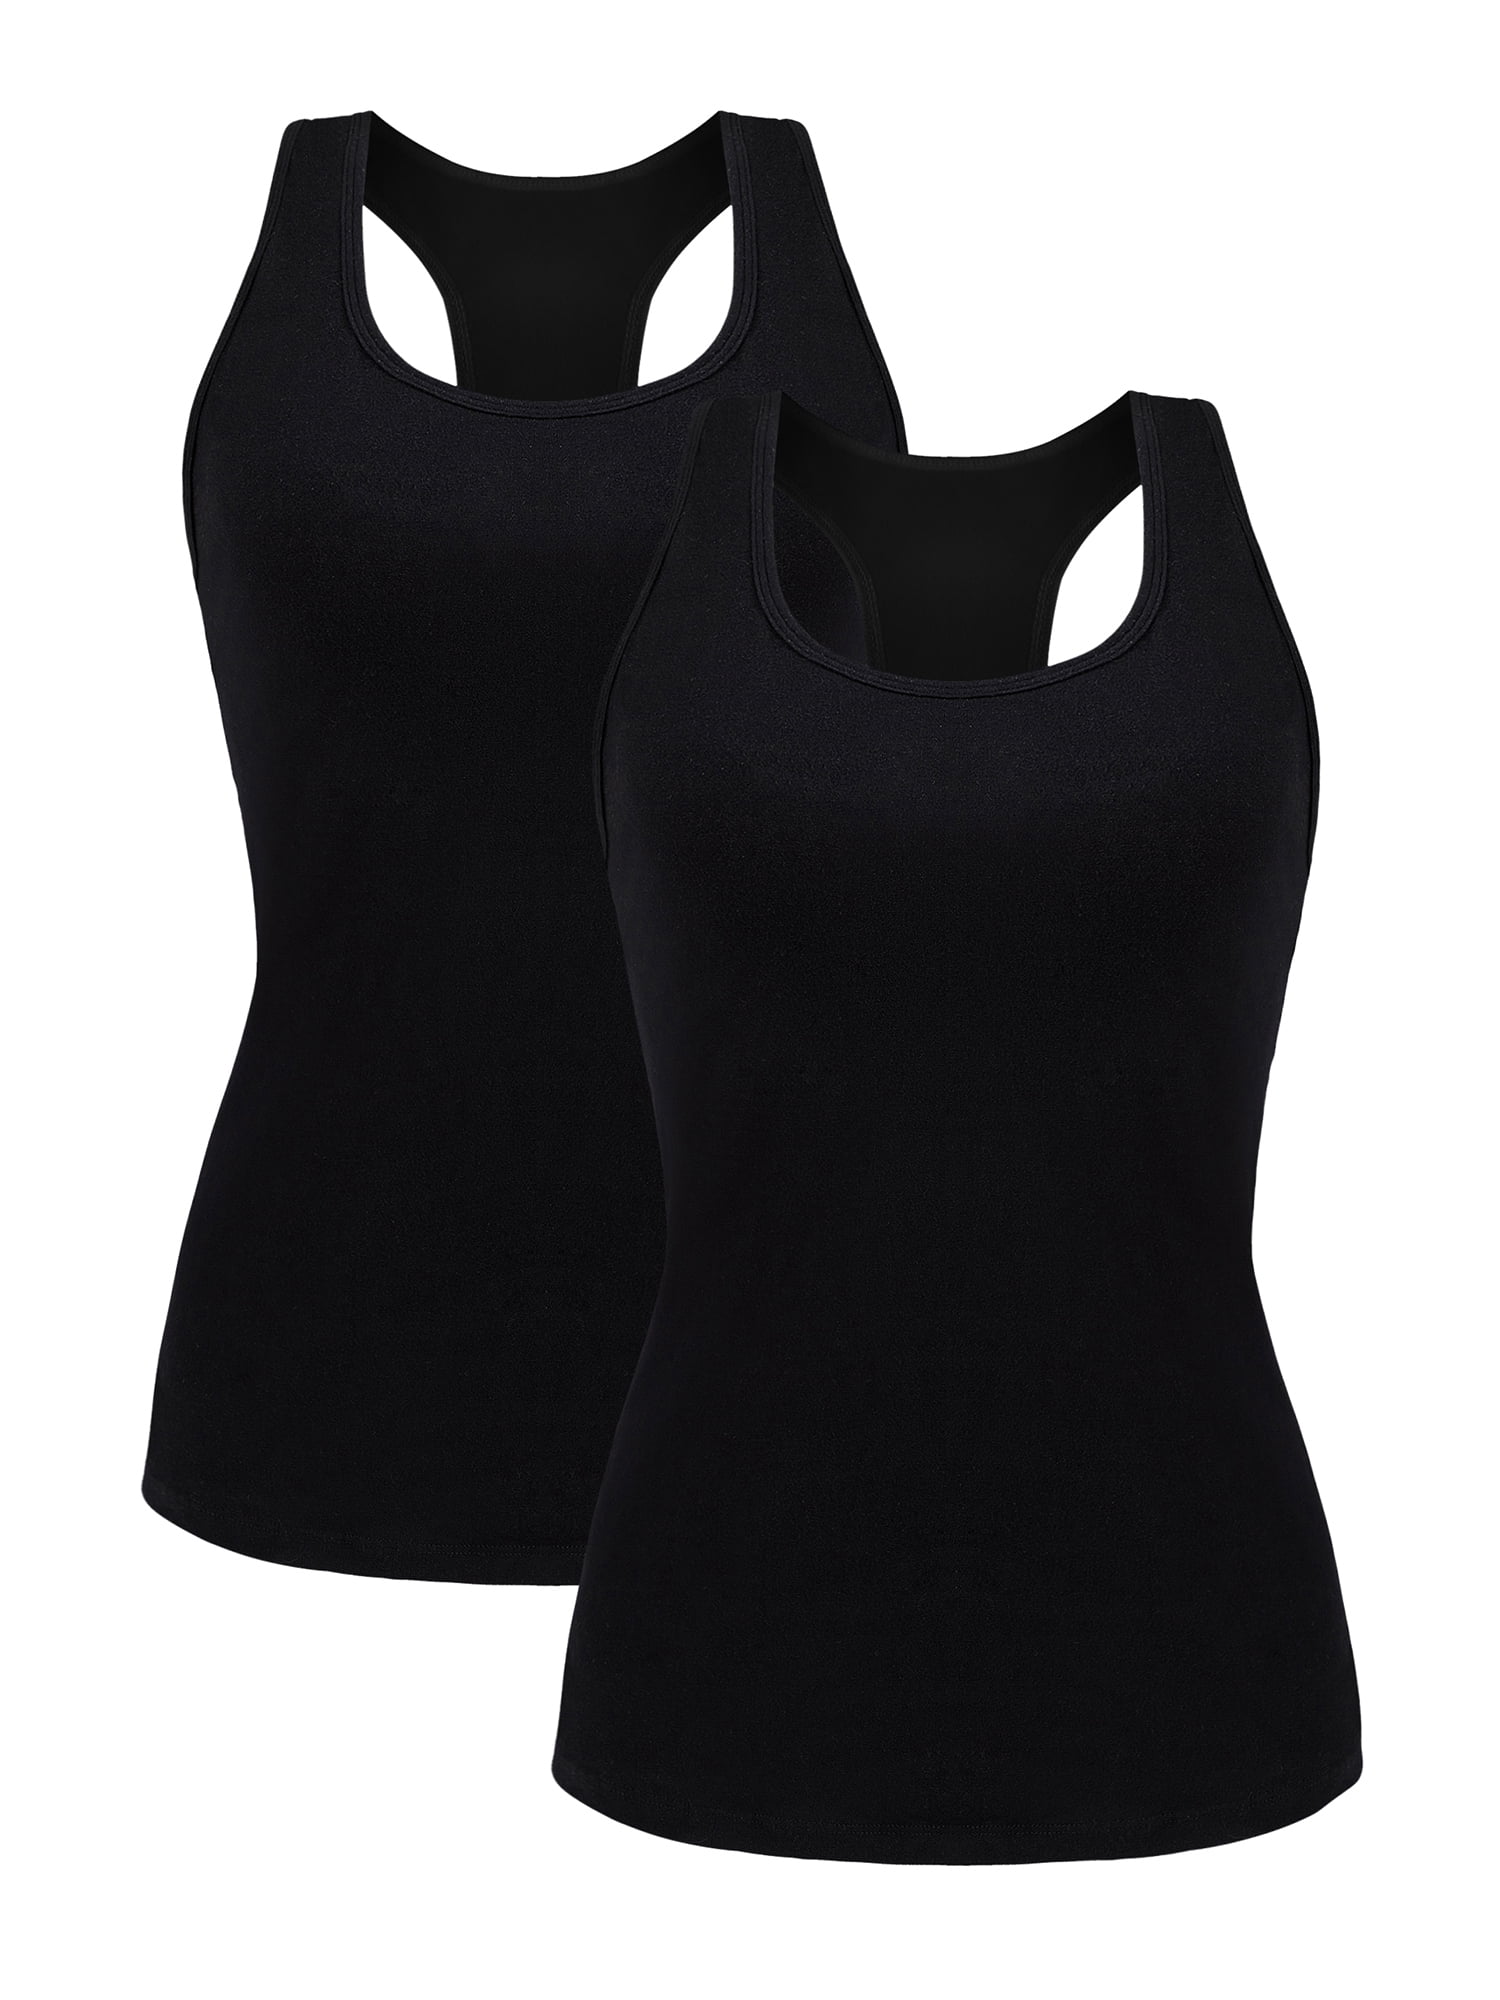 ATTRACO Open Back Workout Tank Top with Built in Bra for Women Athletic Yoga Running Shirt